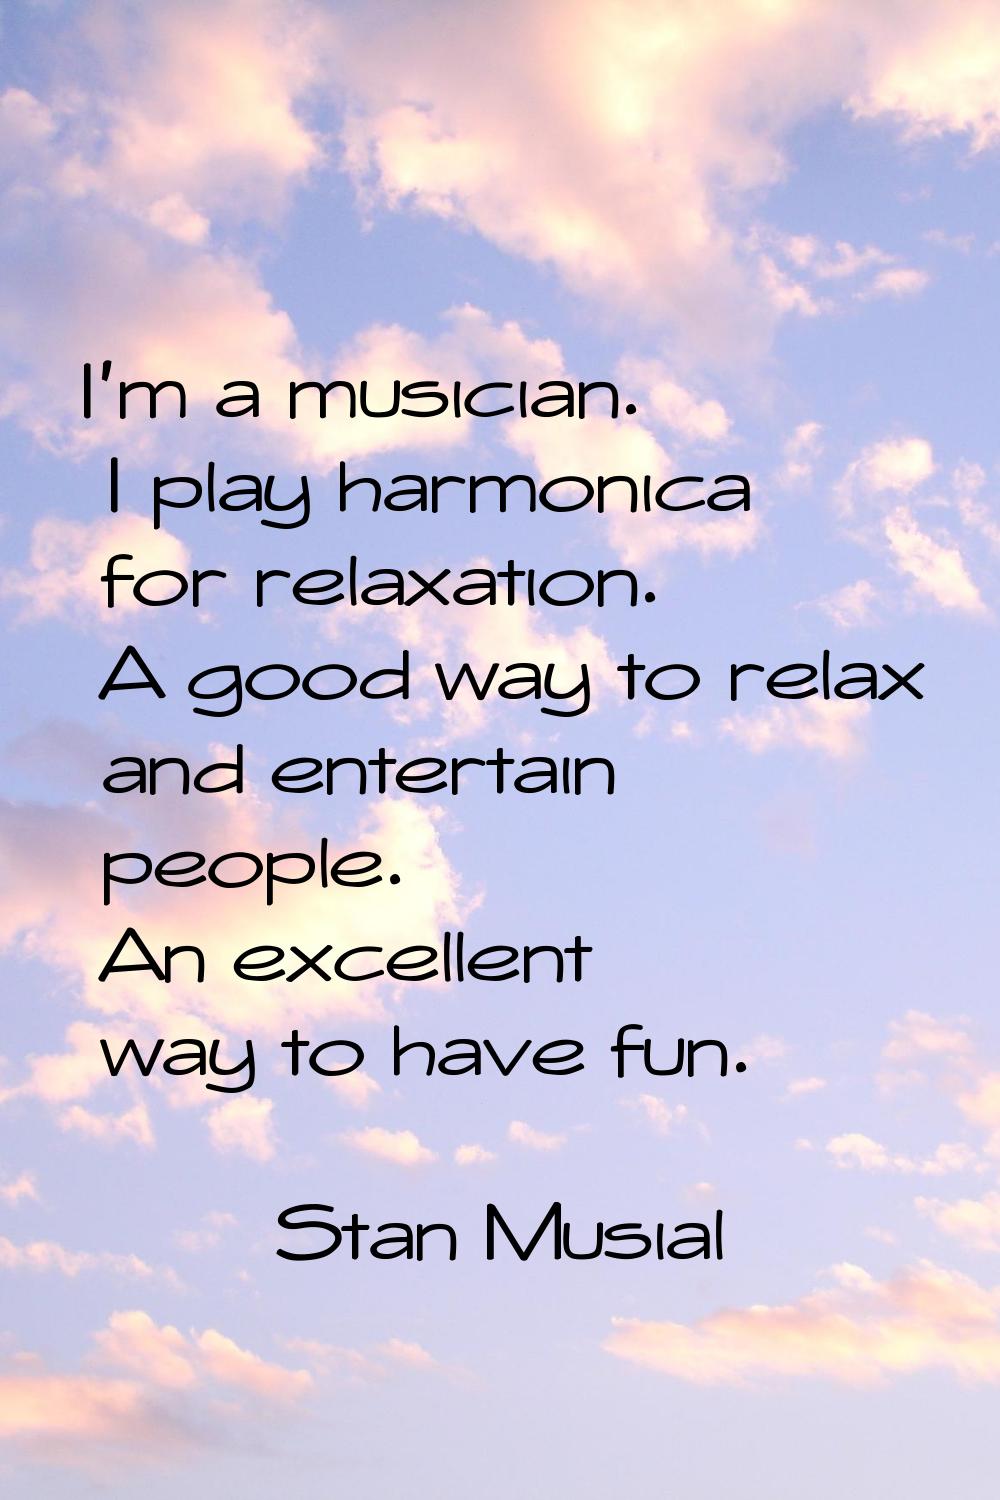 I'm a musician. I play harmonica for relaxation. A good way to relax and entertain people. An excel